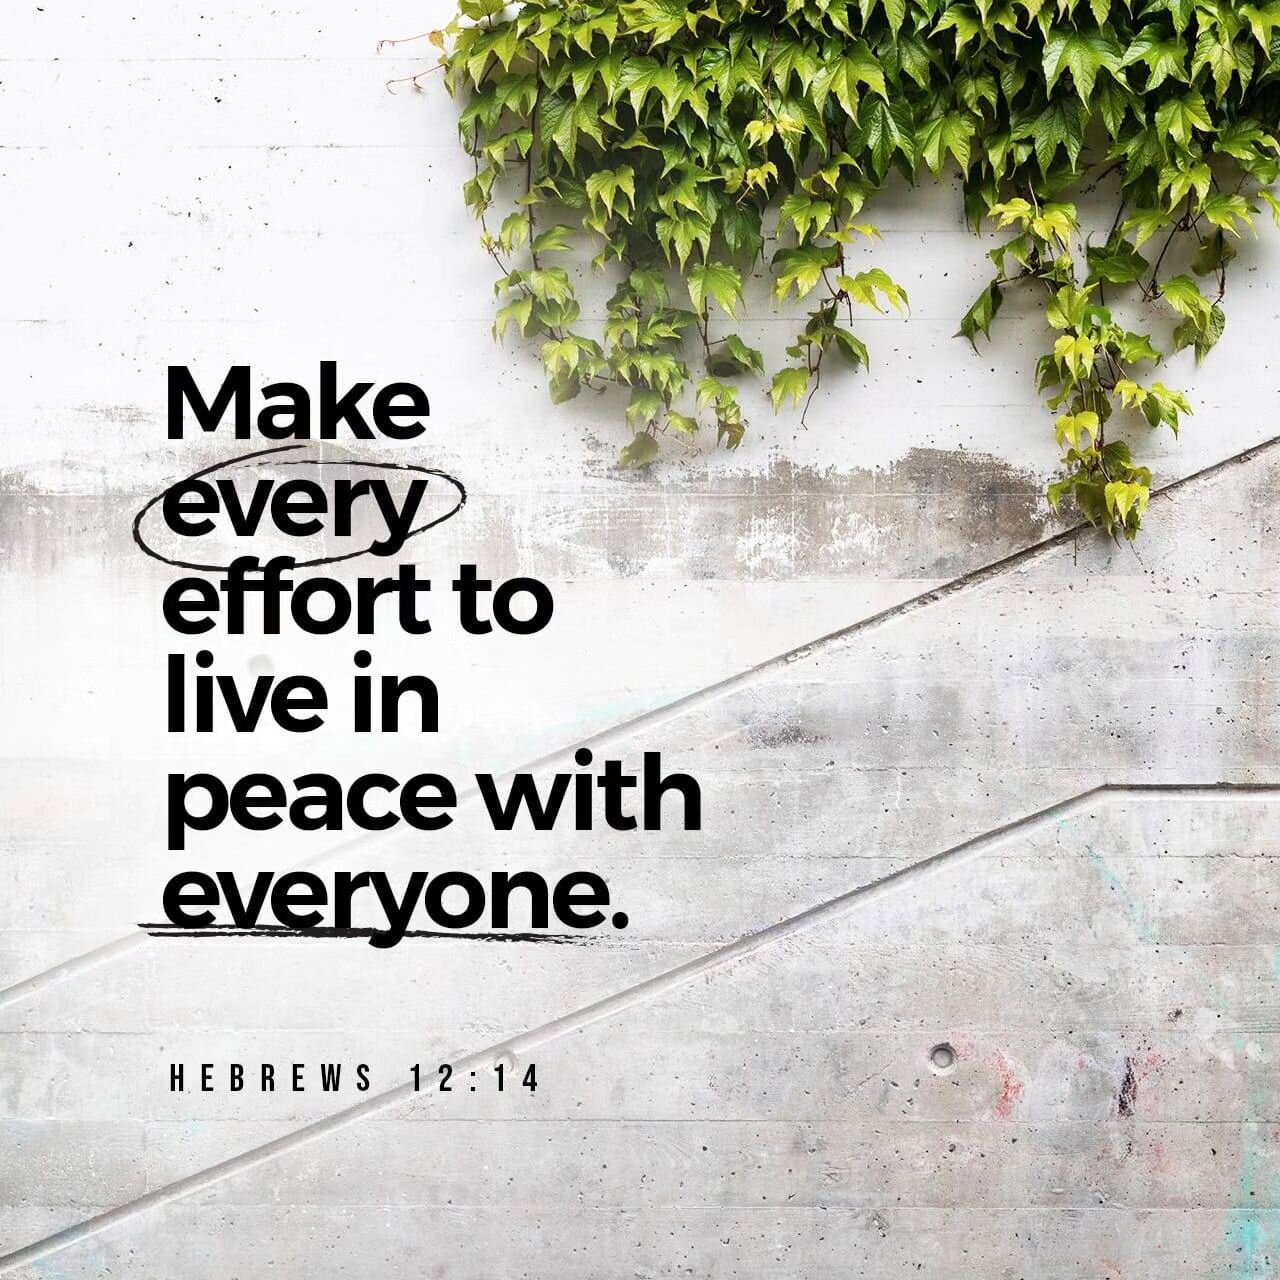 How do we make every effort to live in peace with everyone?

We extend kindness, grace, and speak truth with love.

We serve others. We turn the other cheek. We hold our tongue from a sharp retort.

We listen more than we speak. We pray before we res